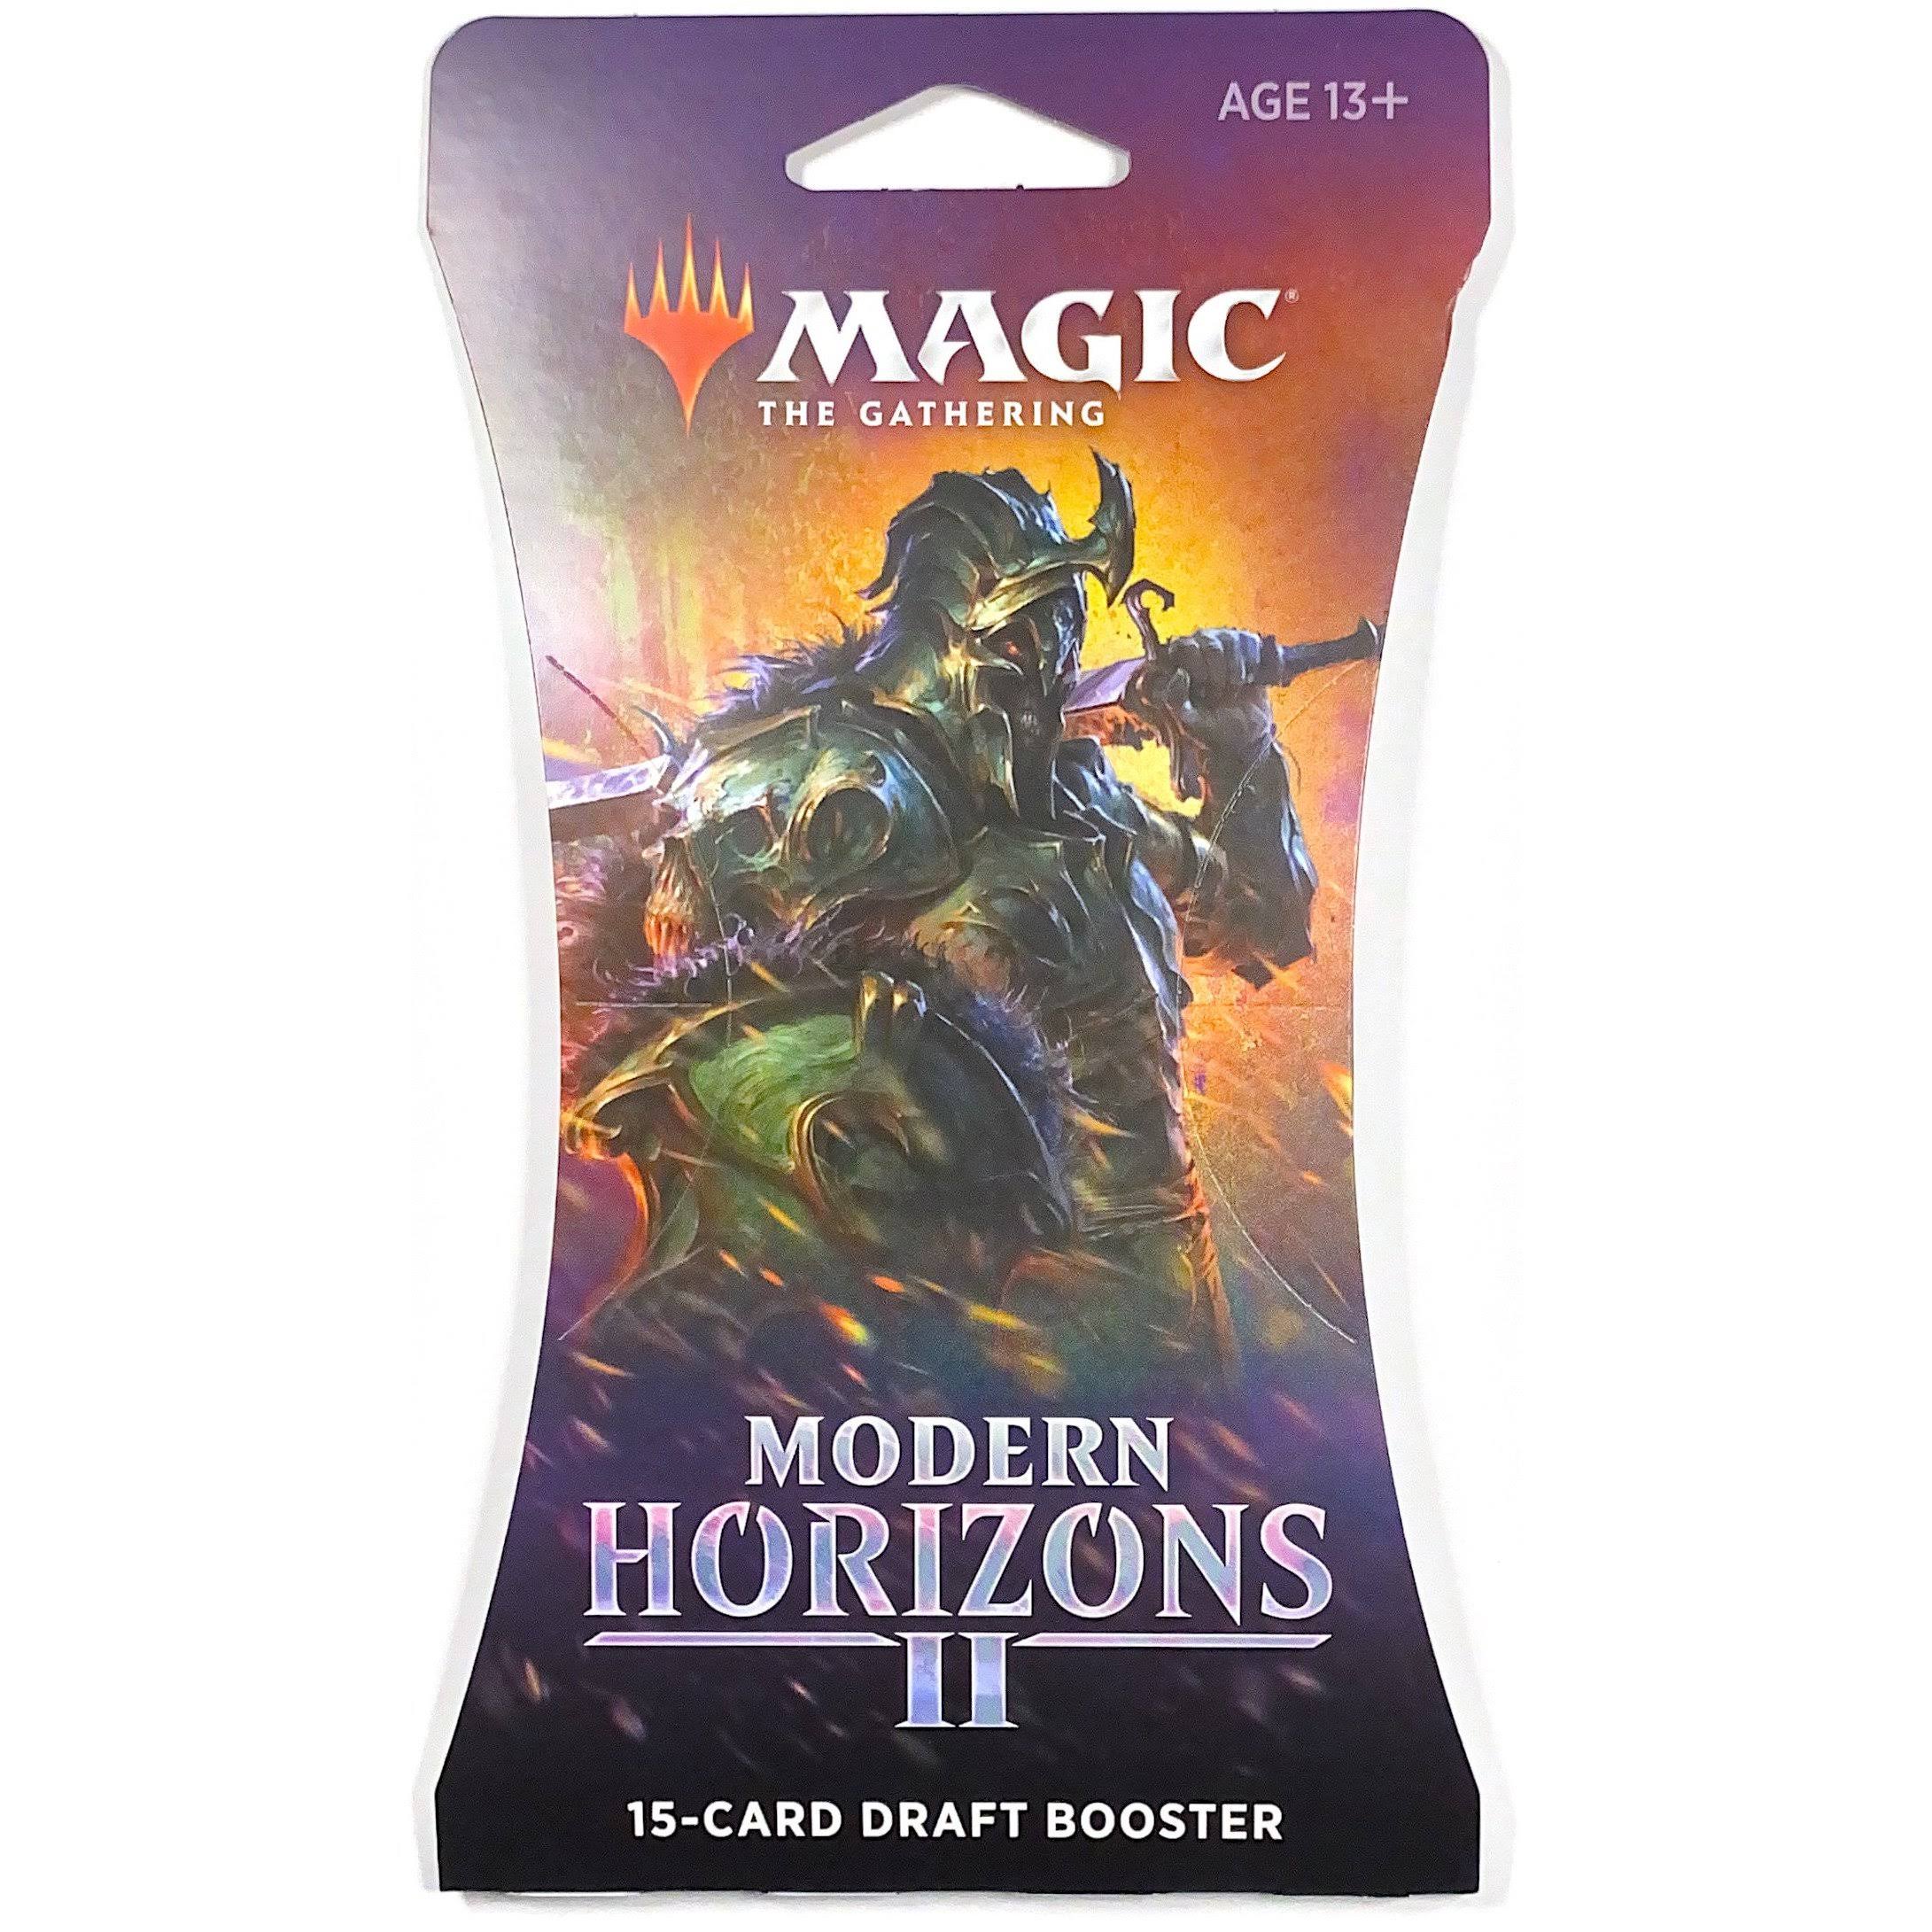 Magic: The Gathering Modern Horizons 2 Sleeved 15-Card Draft Booster Pack